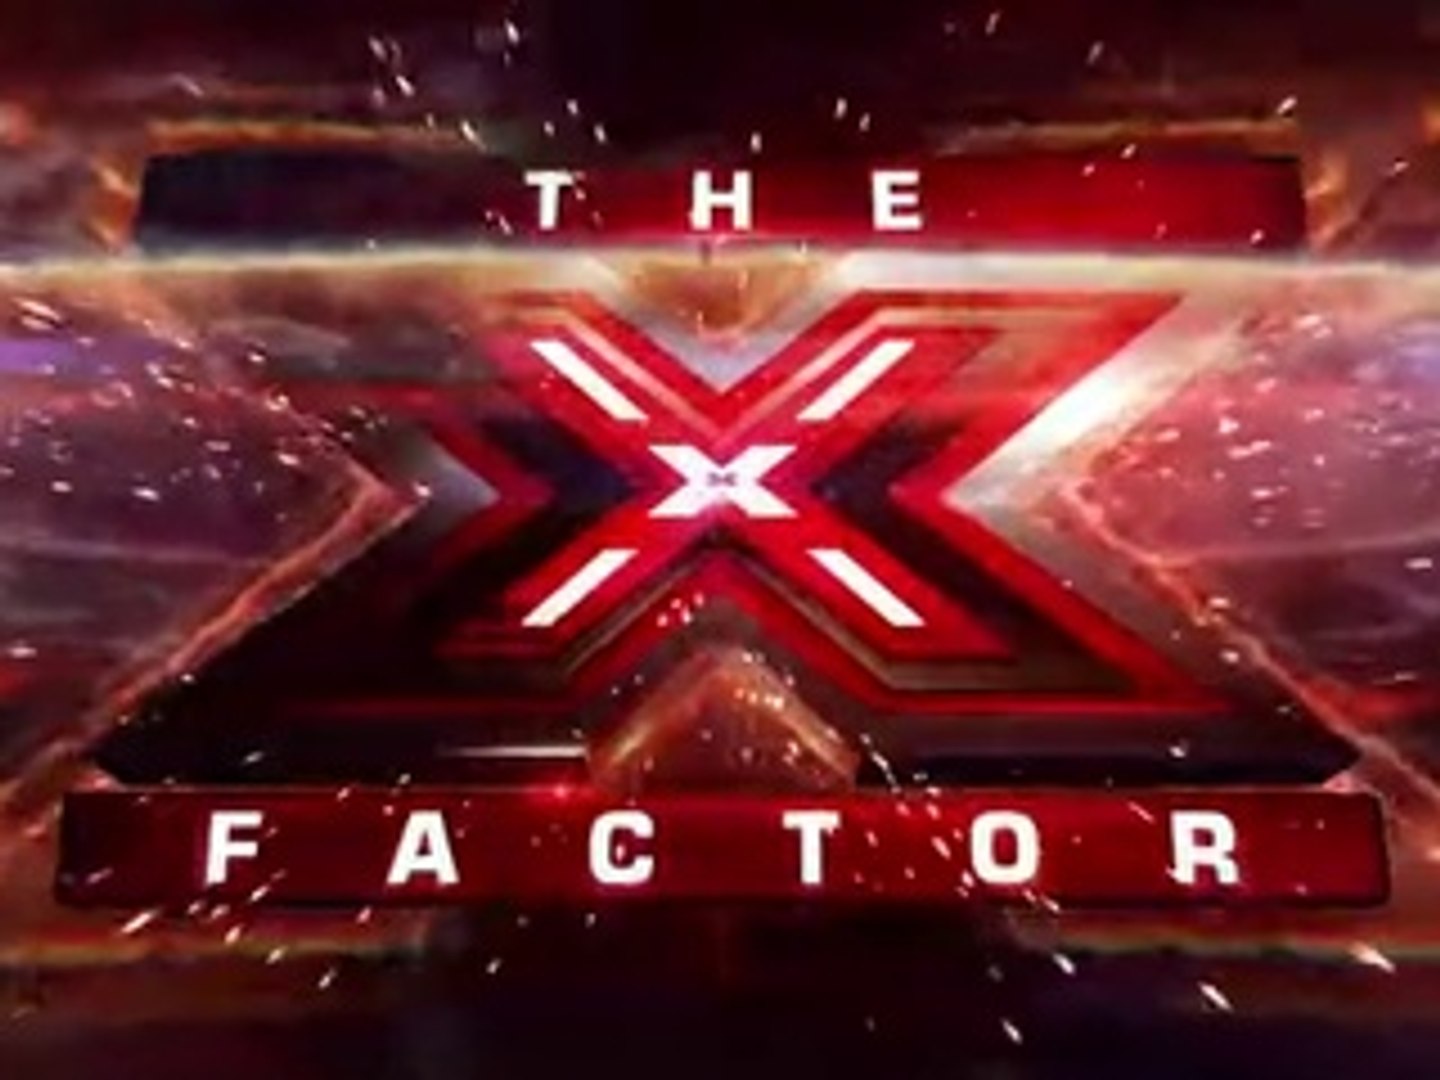 Important Info For X Factor Final Audience Members - The X Factor UK 2013 - OFFICIAL CAHNNEL